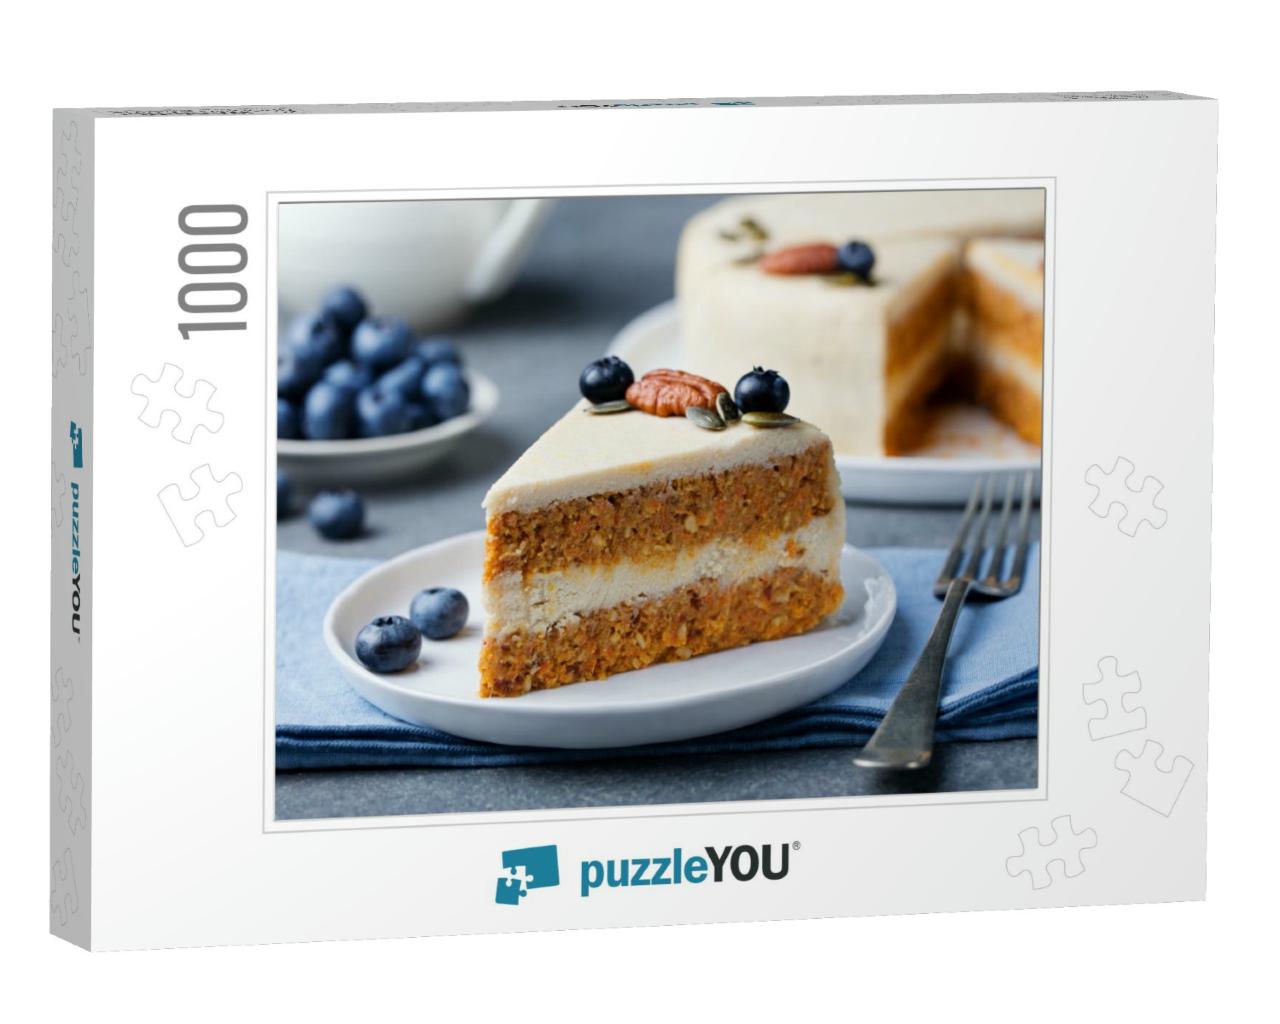 Vegan, Raw Carrot Cake. Healthy Food. Grey Stone Backgrou... Jigsaw Puzzle with 1000 pieces